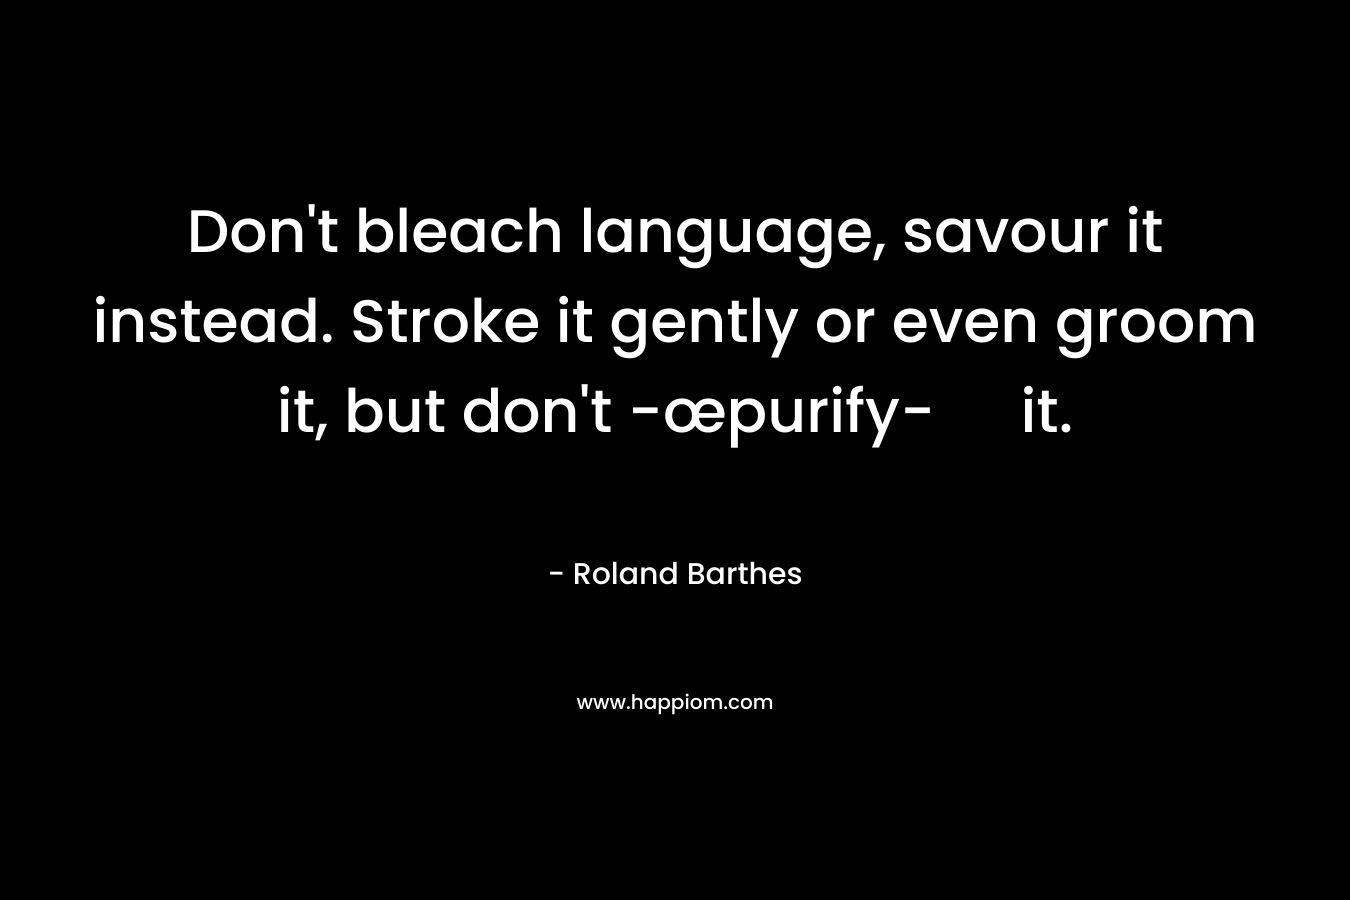 Don’t bleach language, savour it instead. Stroke it gently or even groom it, but don’t -œpurify- it. – Roland Barthes